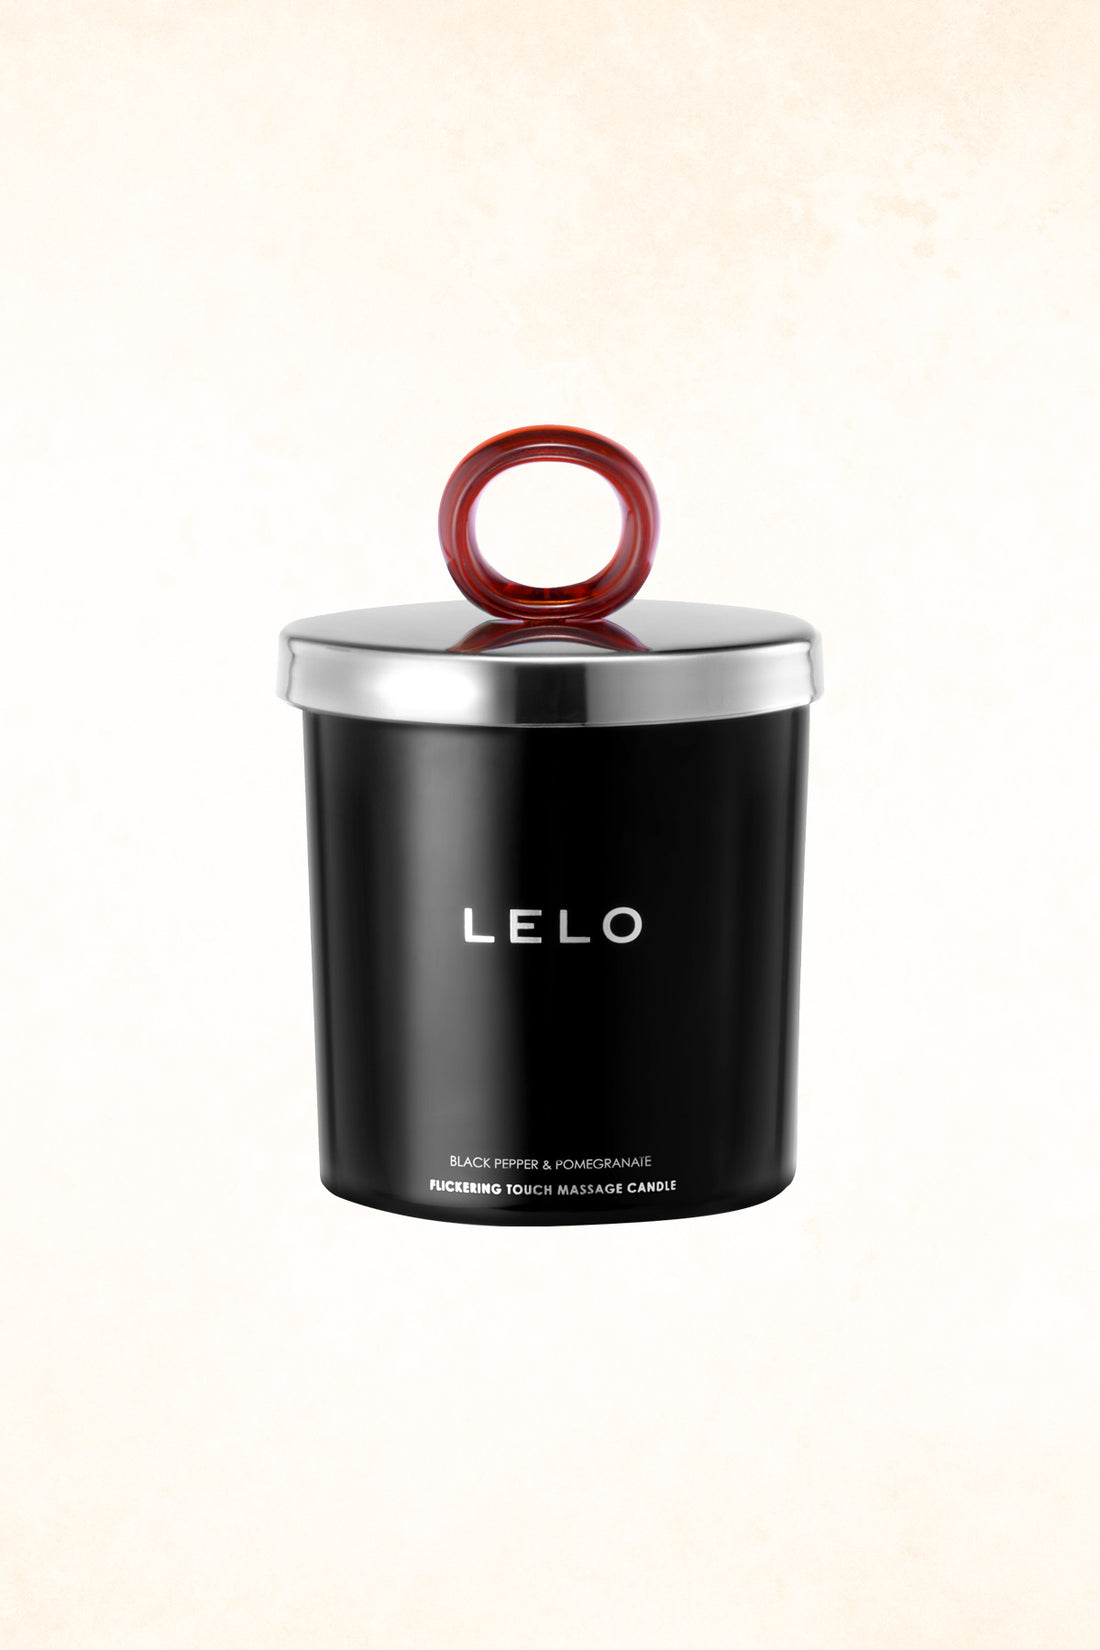 Lelo - Flickering Touch Massage Candle - Black Pepper &amp; Pomegranate